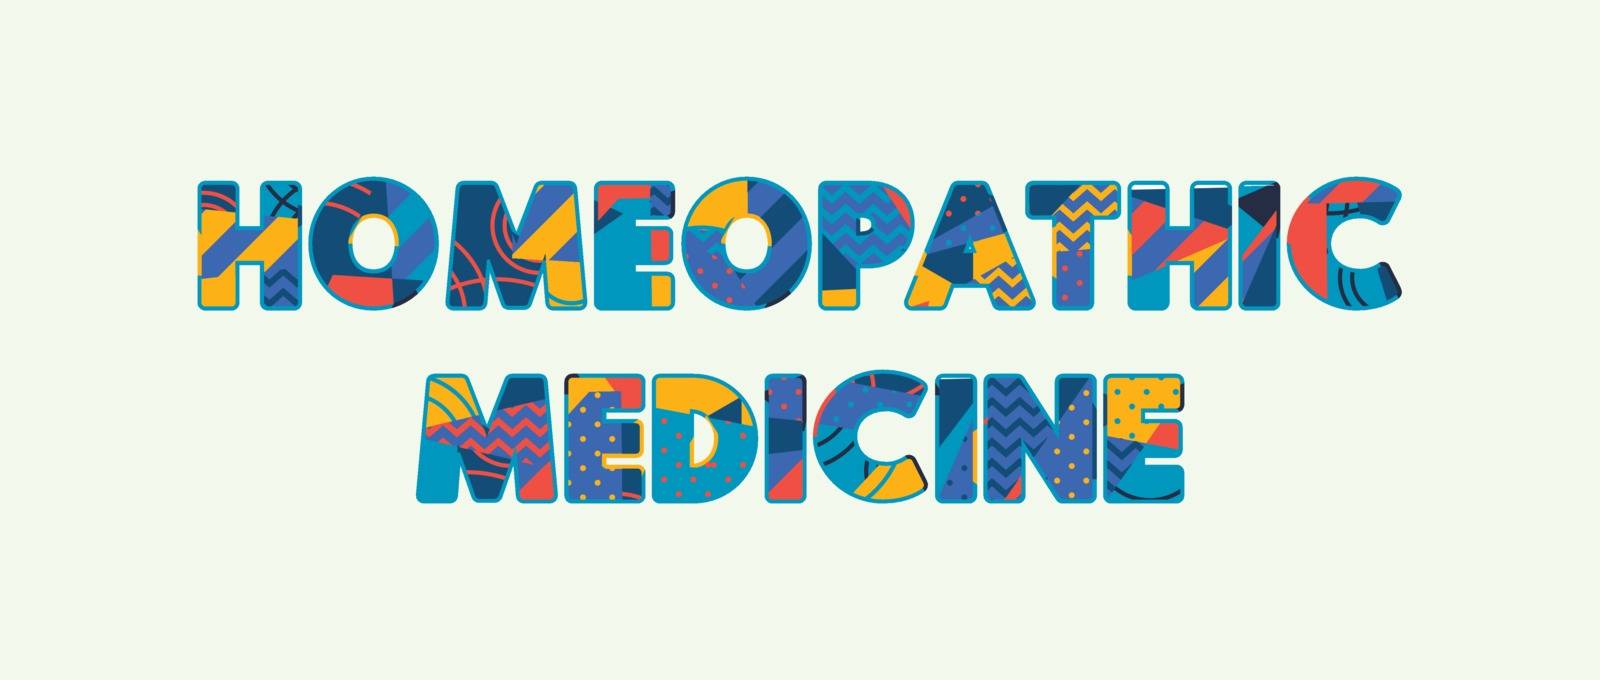 Homeopathic Medicine Concept Word Art Illustration by enterlinedesign